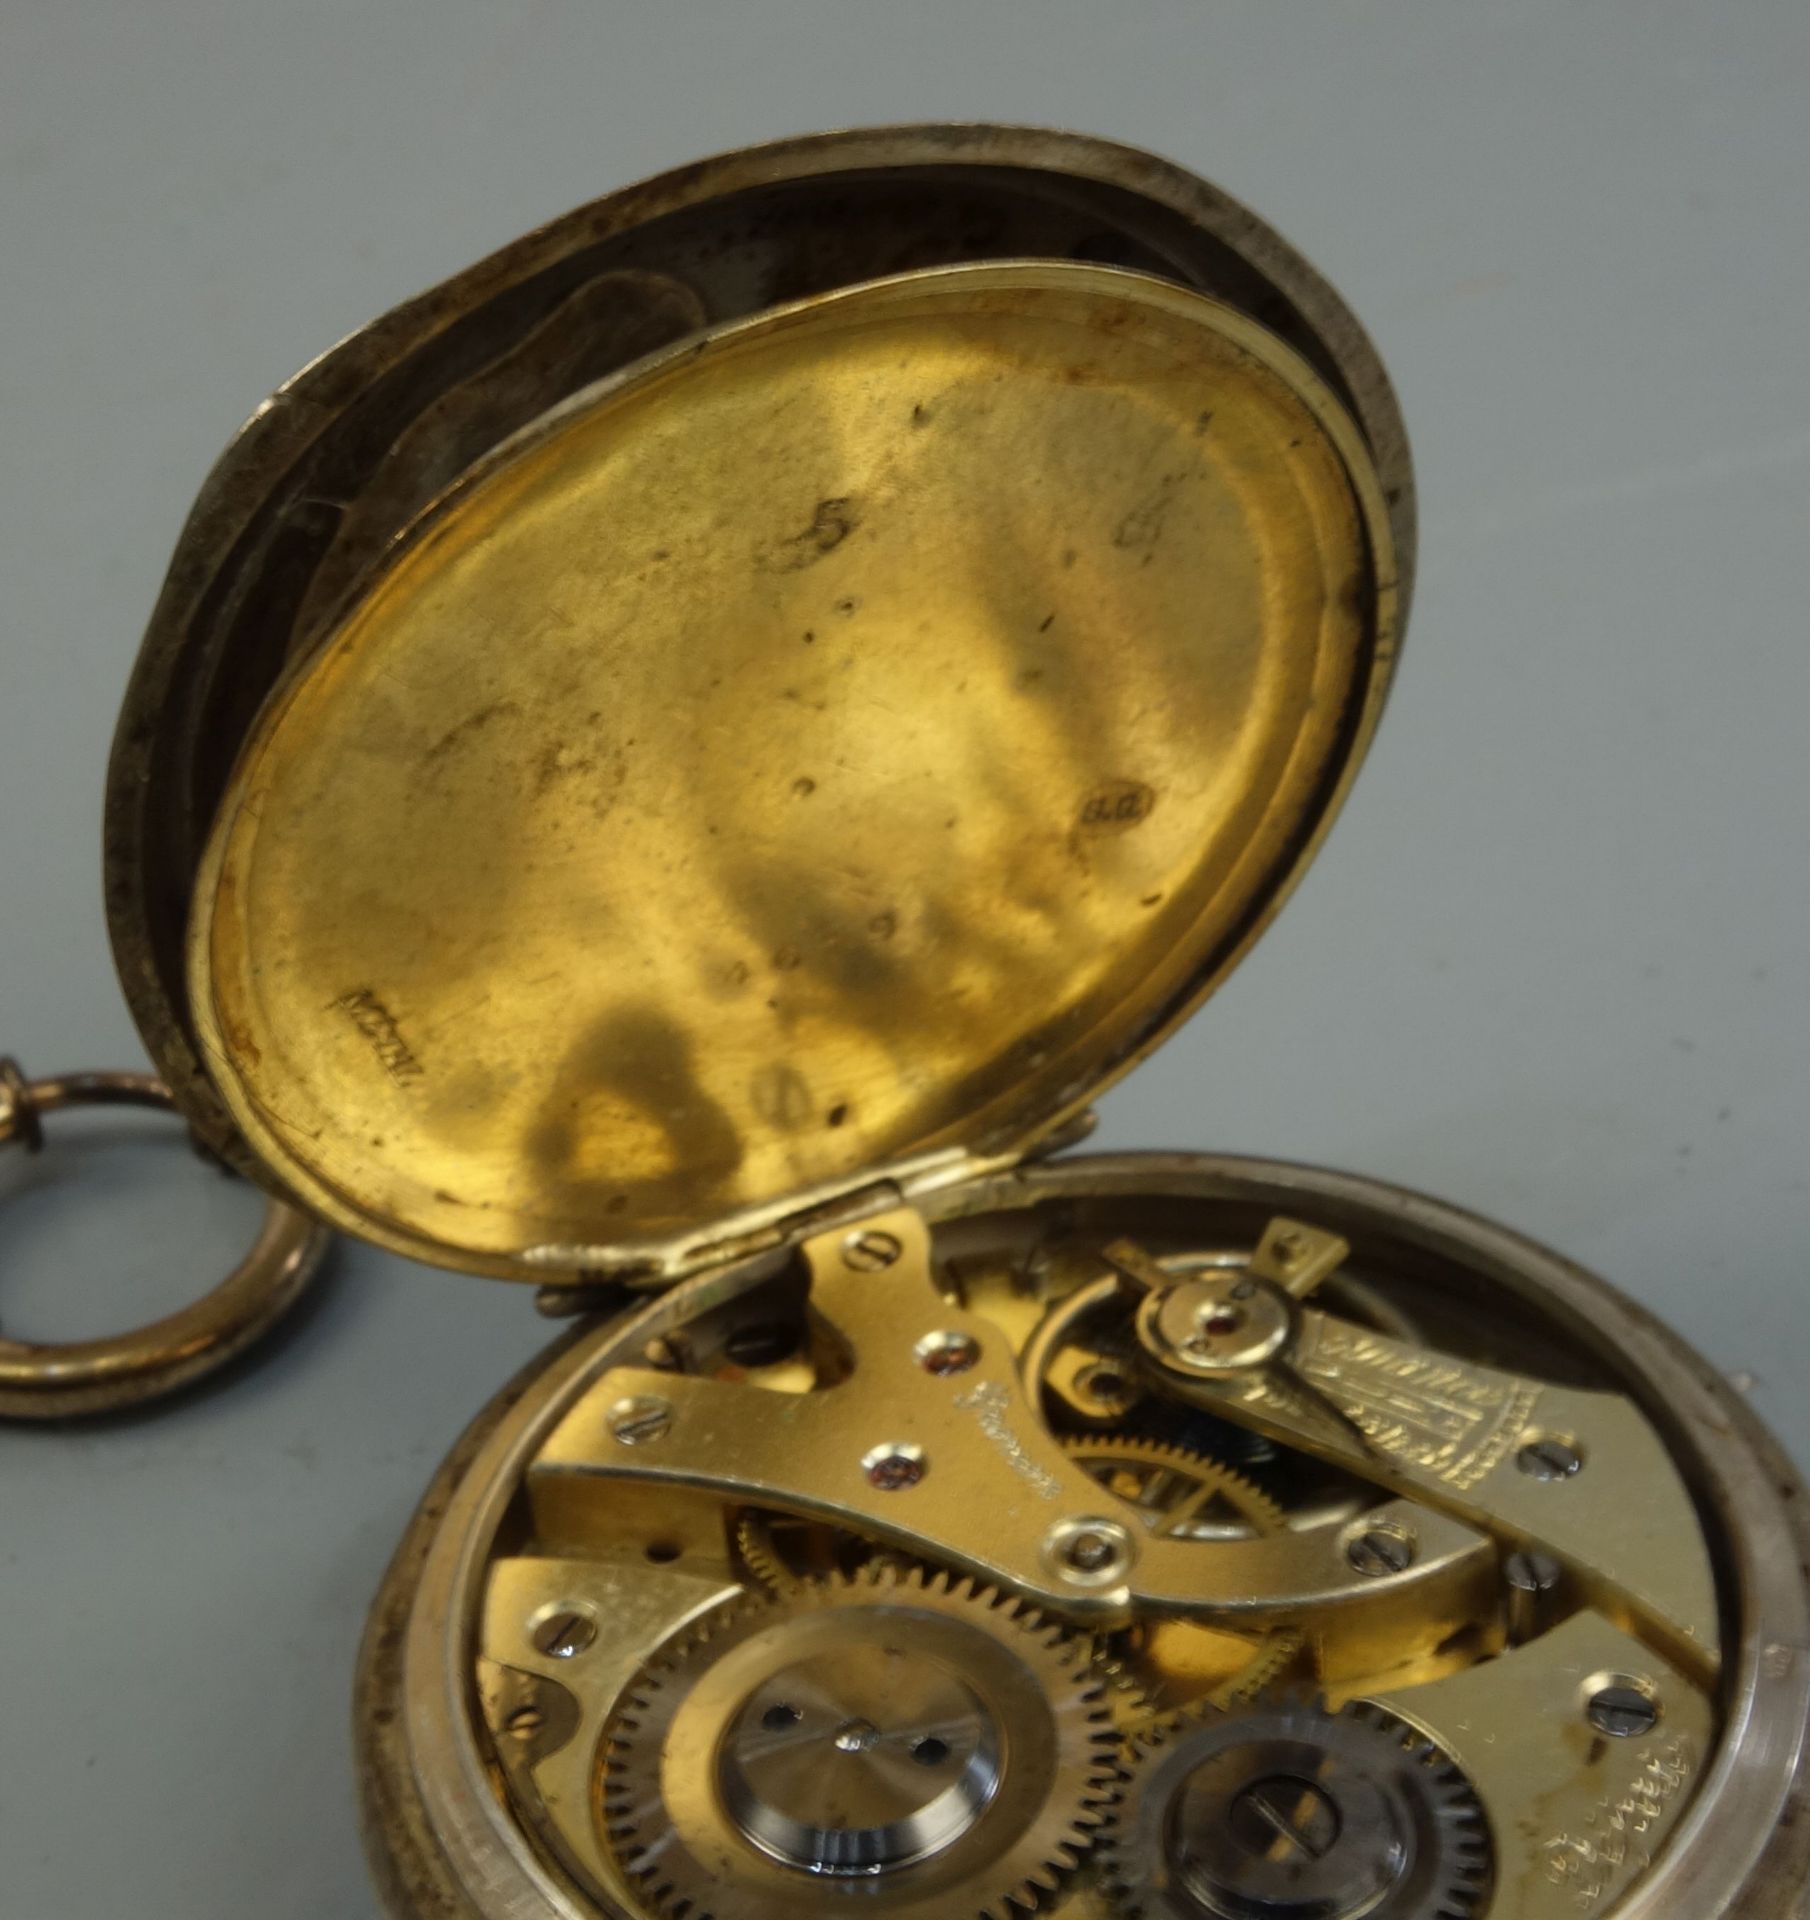 SILVER POCKET WATCH WITH POCKET WATCH CHAIN - Image 3 of 3